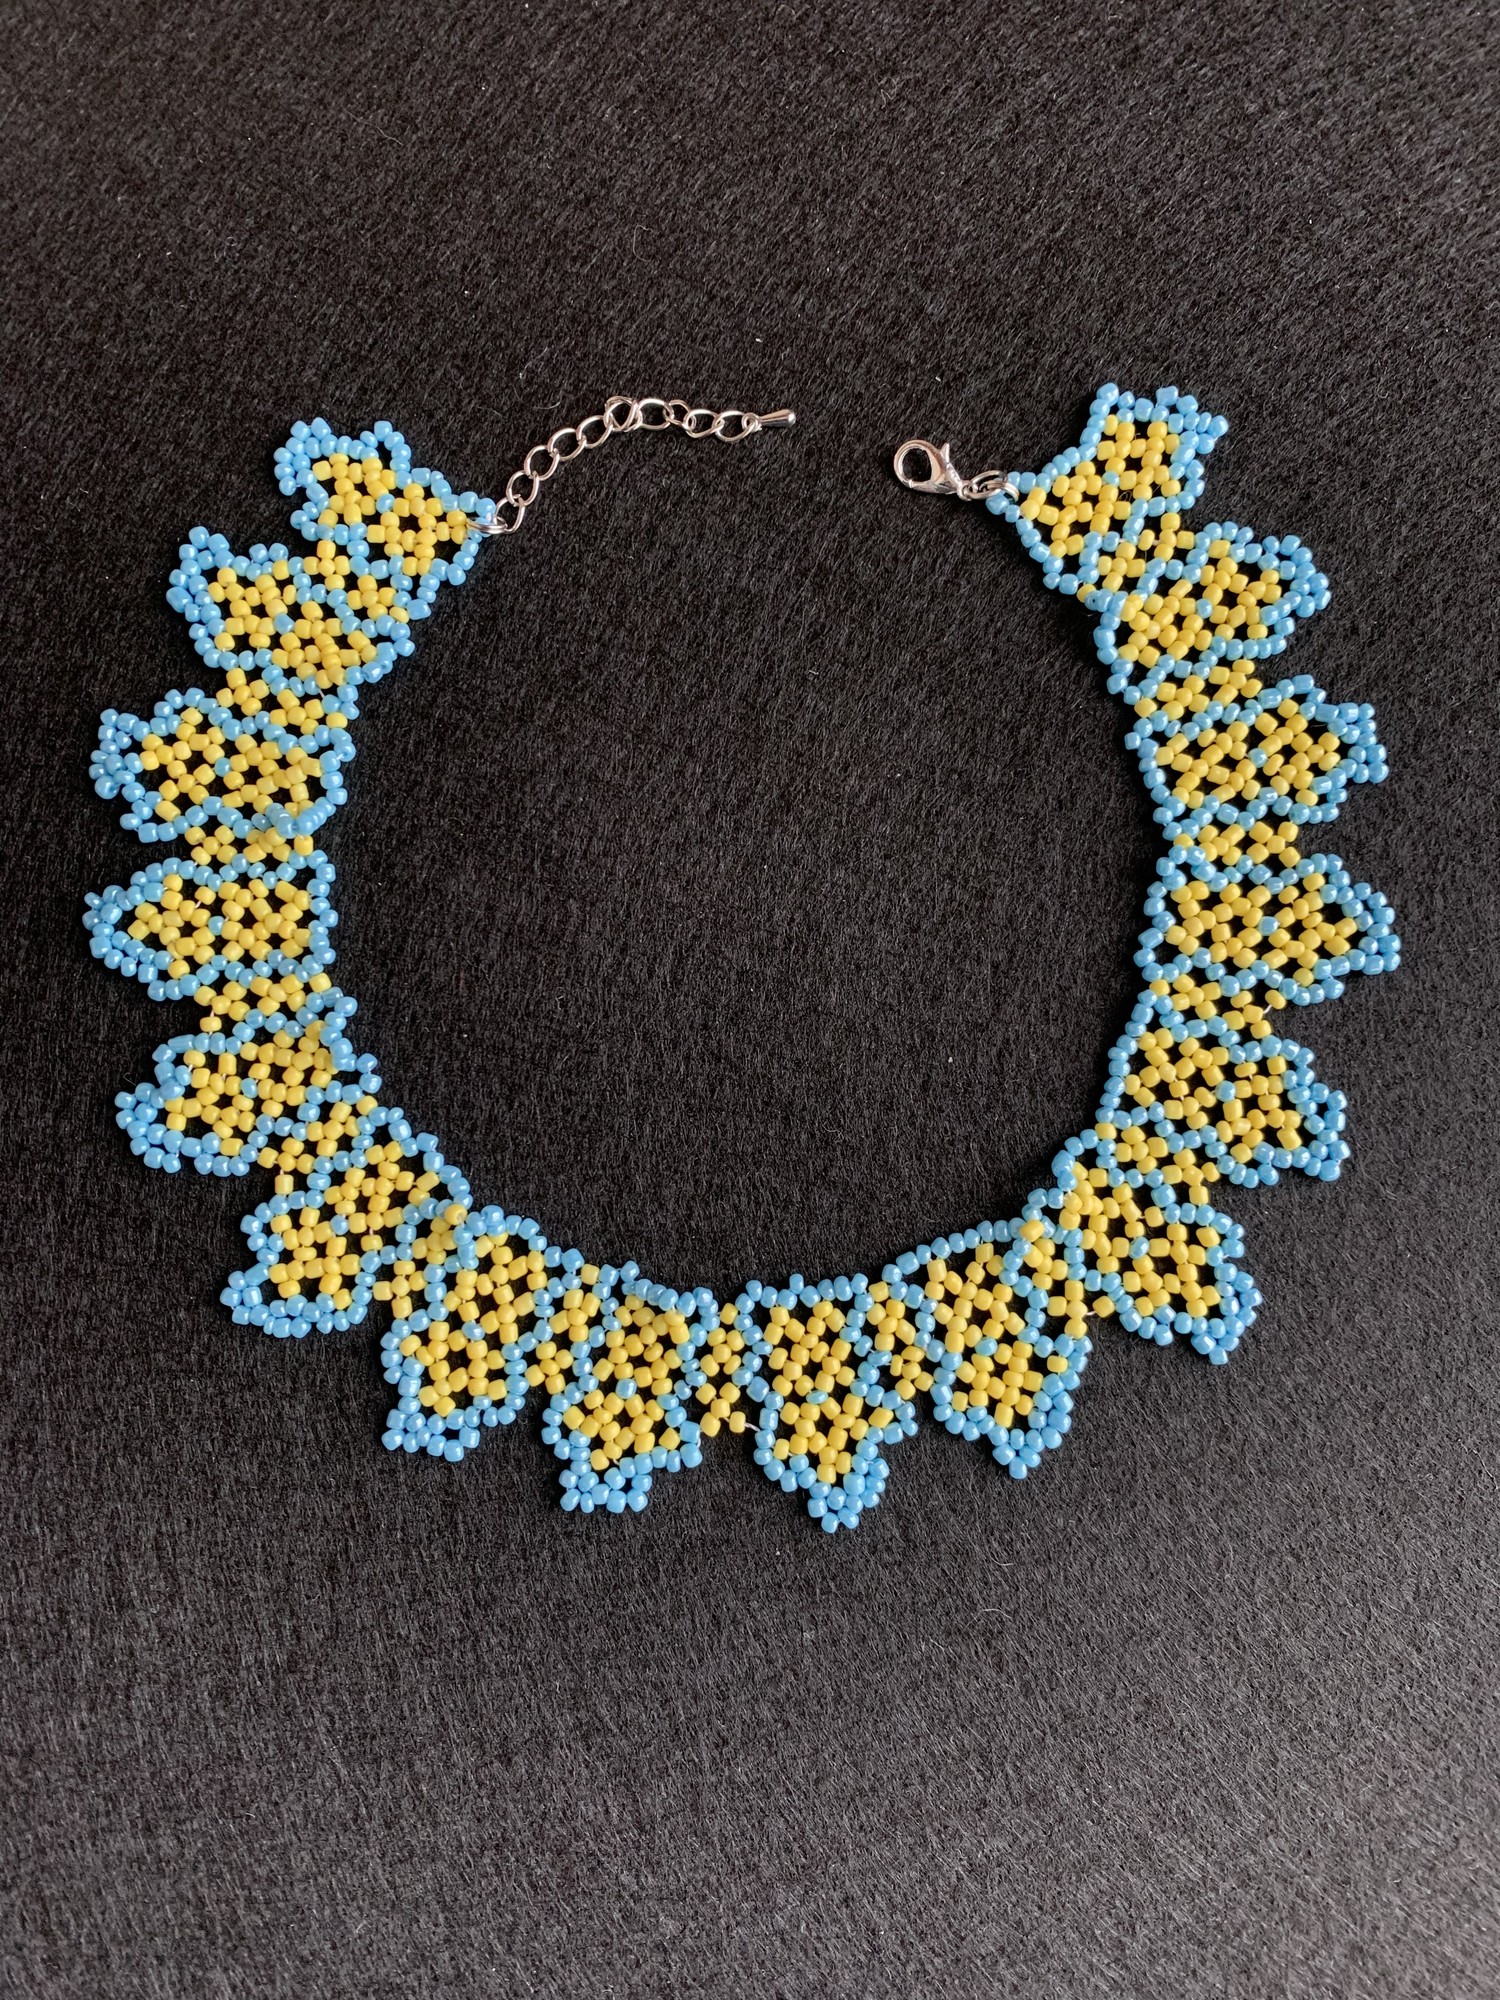 Necklace made of handmade beads